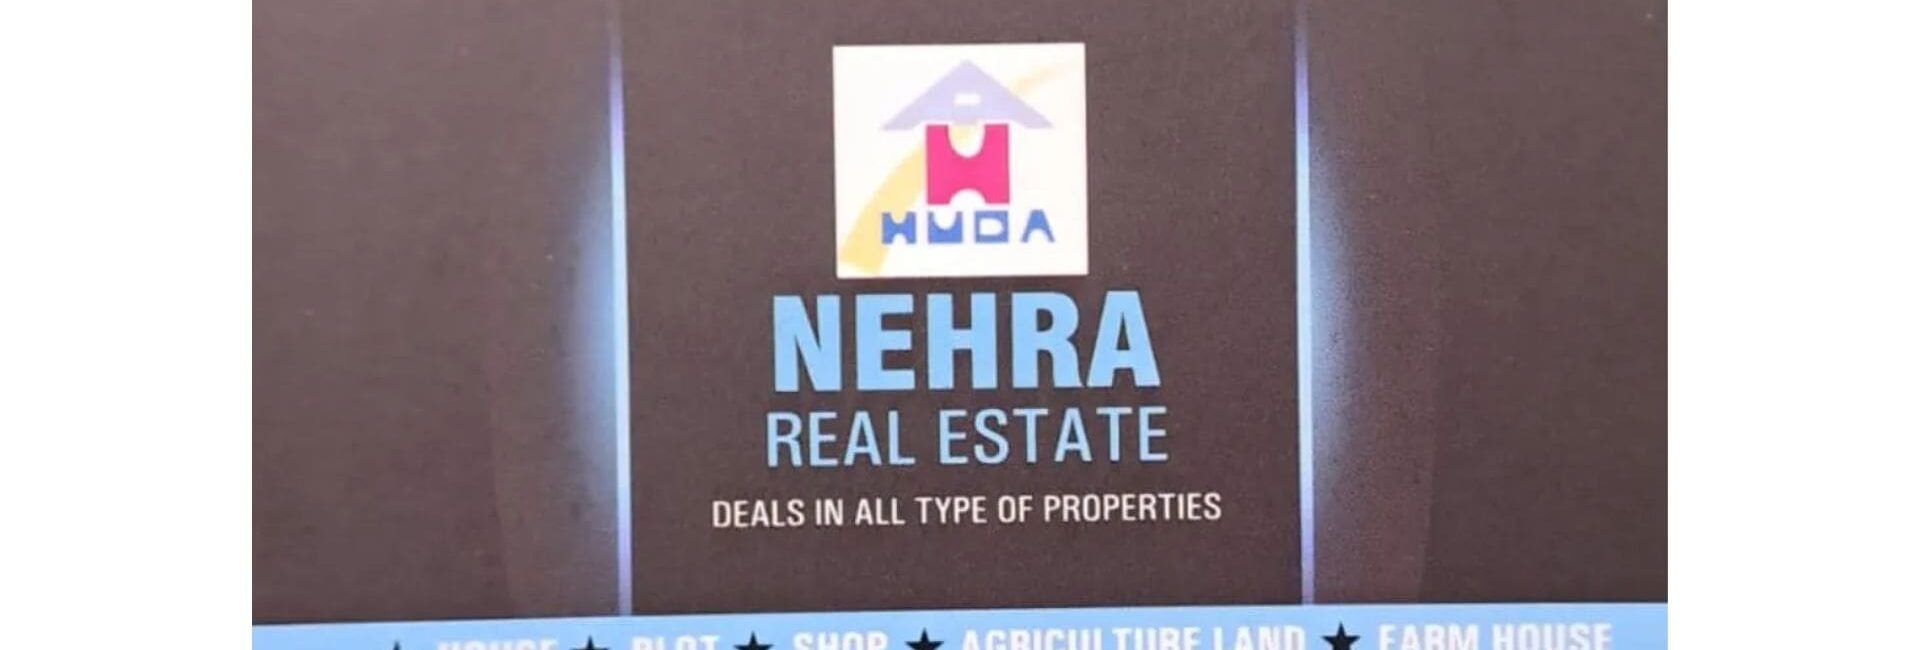 Nehra Real Estate - Real Estate Agent in Hisar